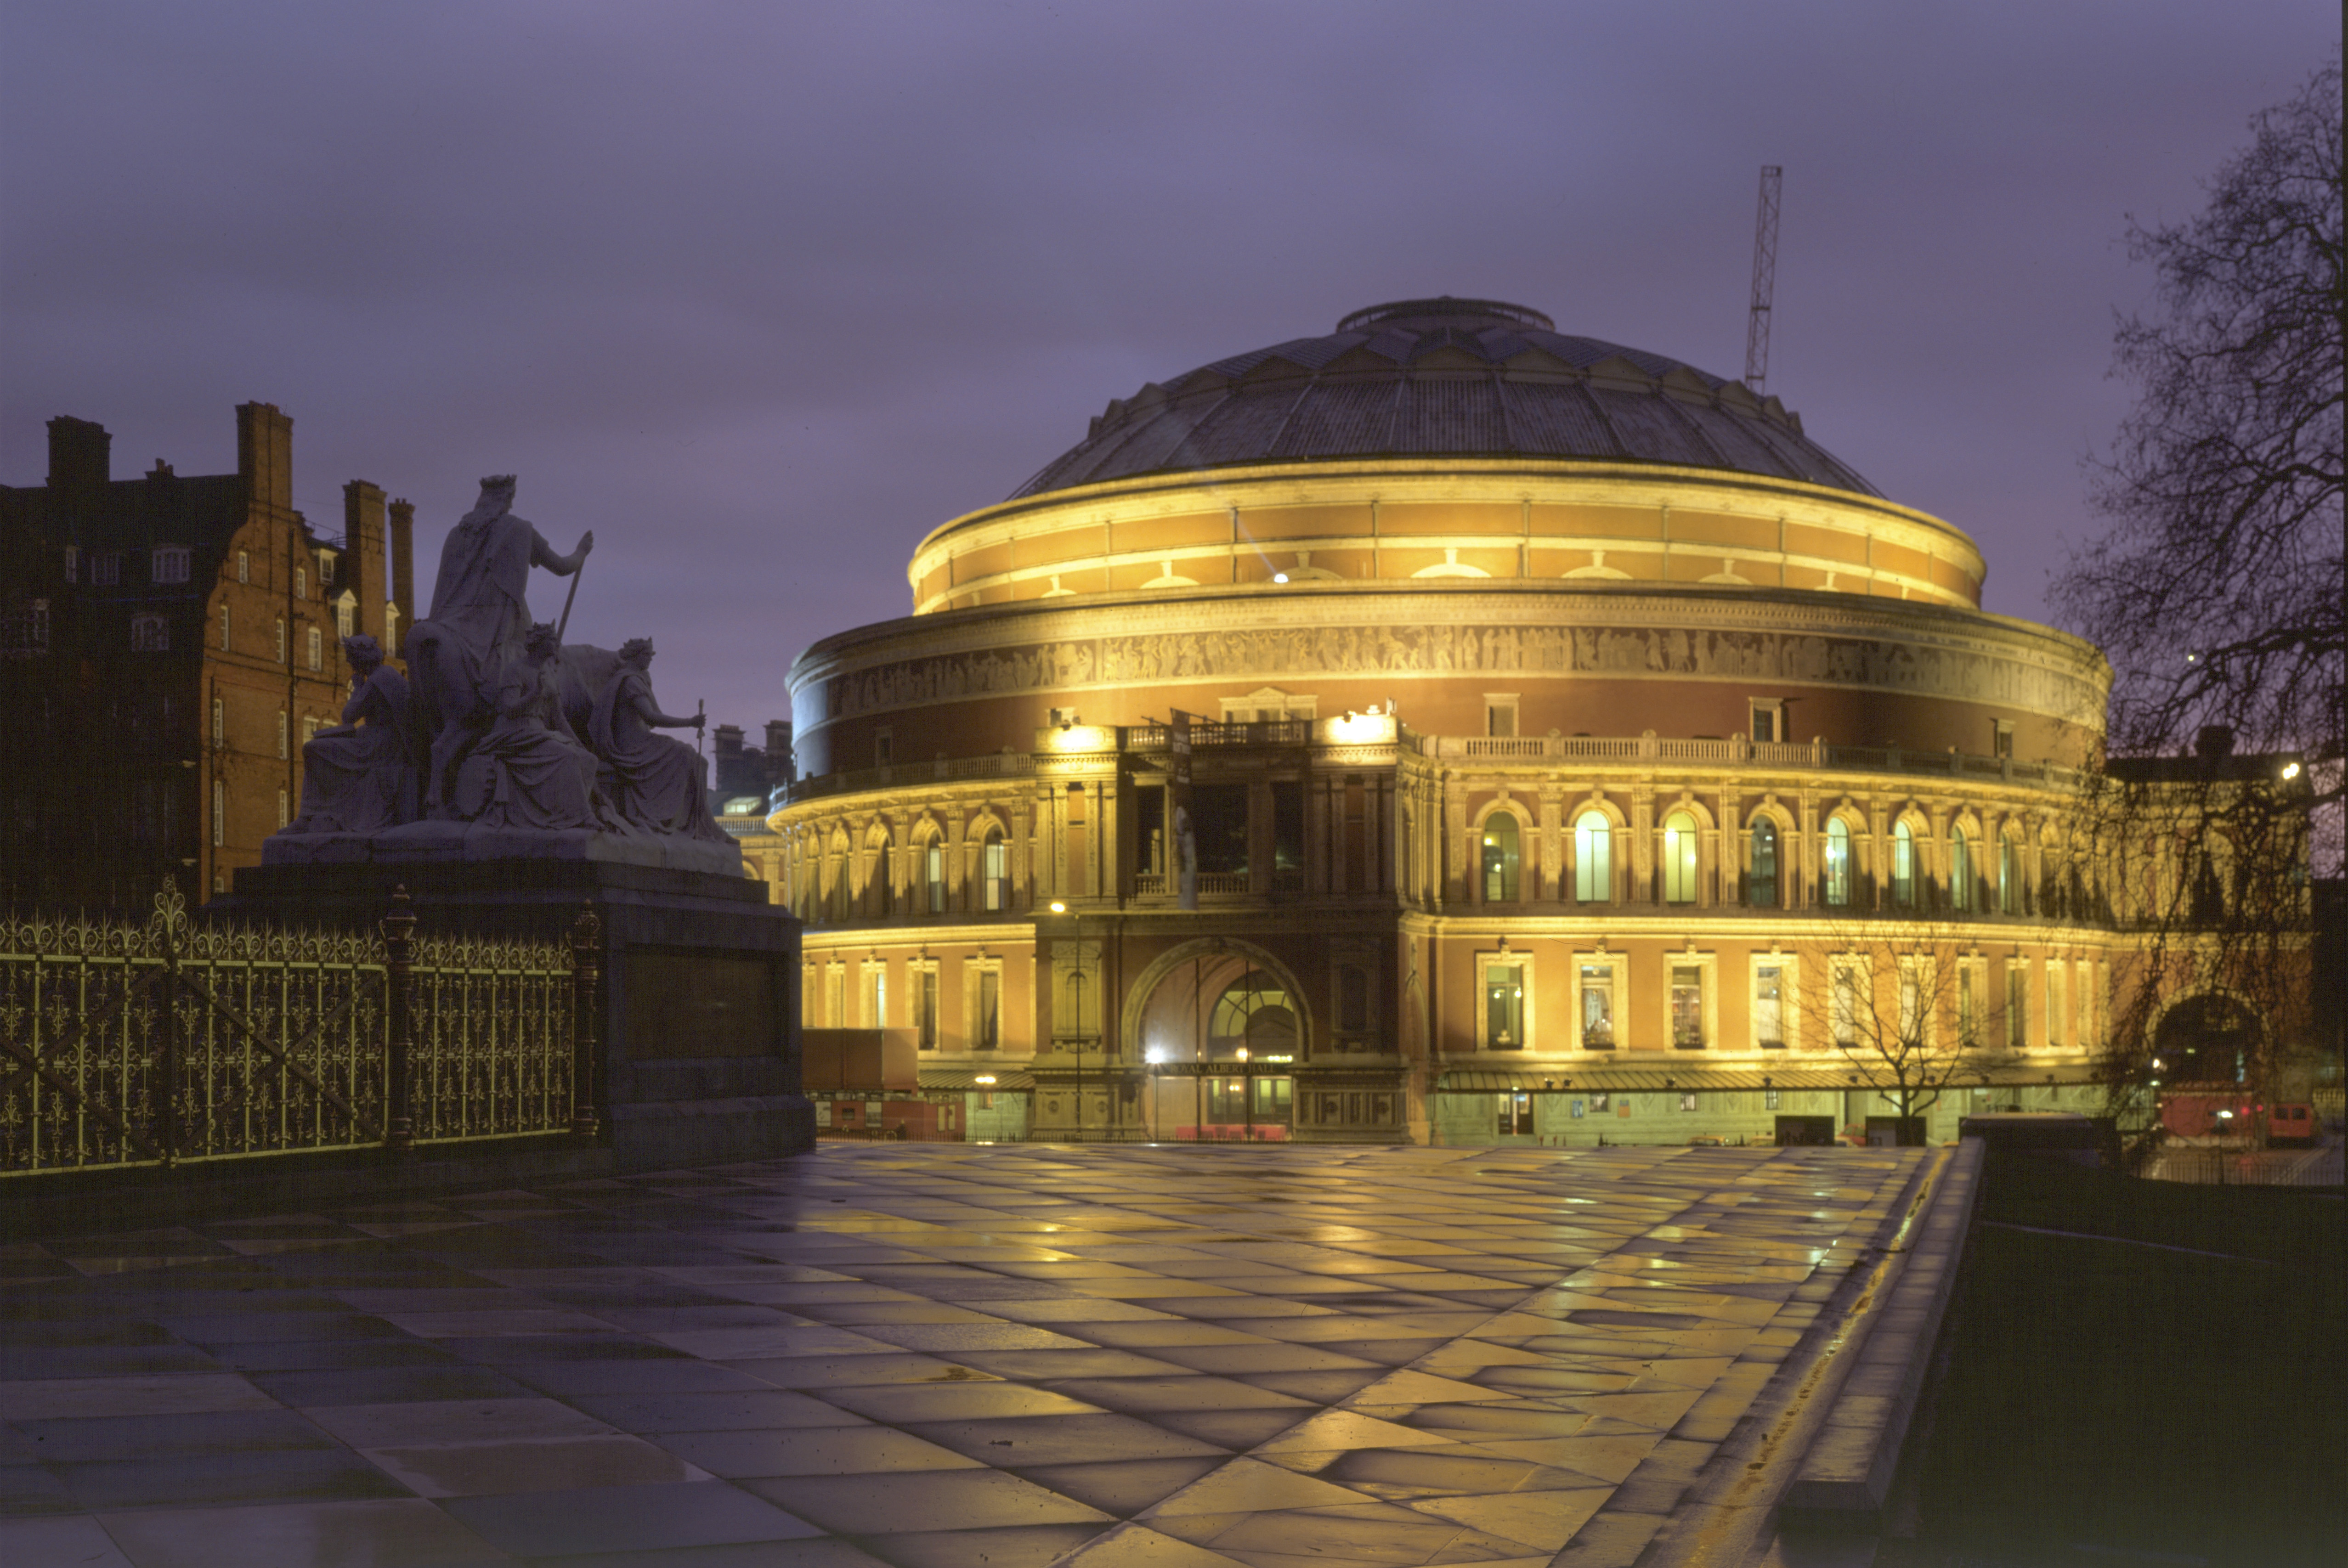  Go listen to the first-ever gaming concert at the BBC Proms, a landmark event 